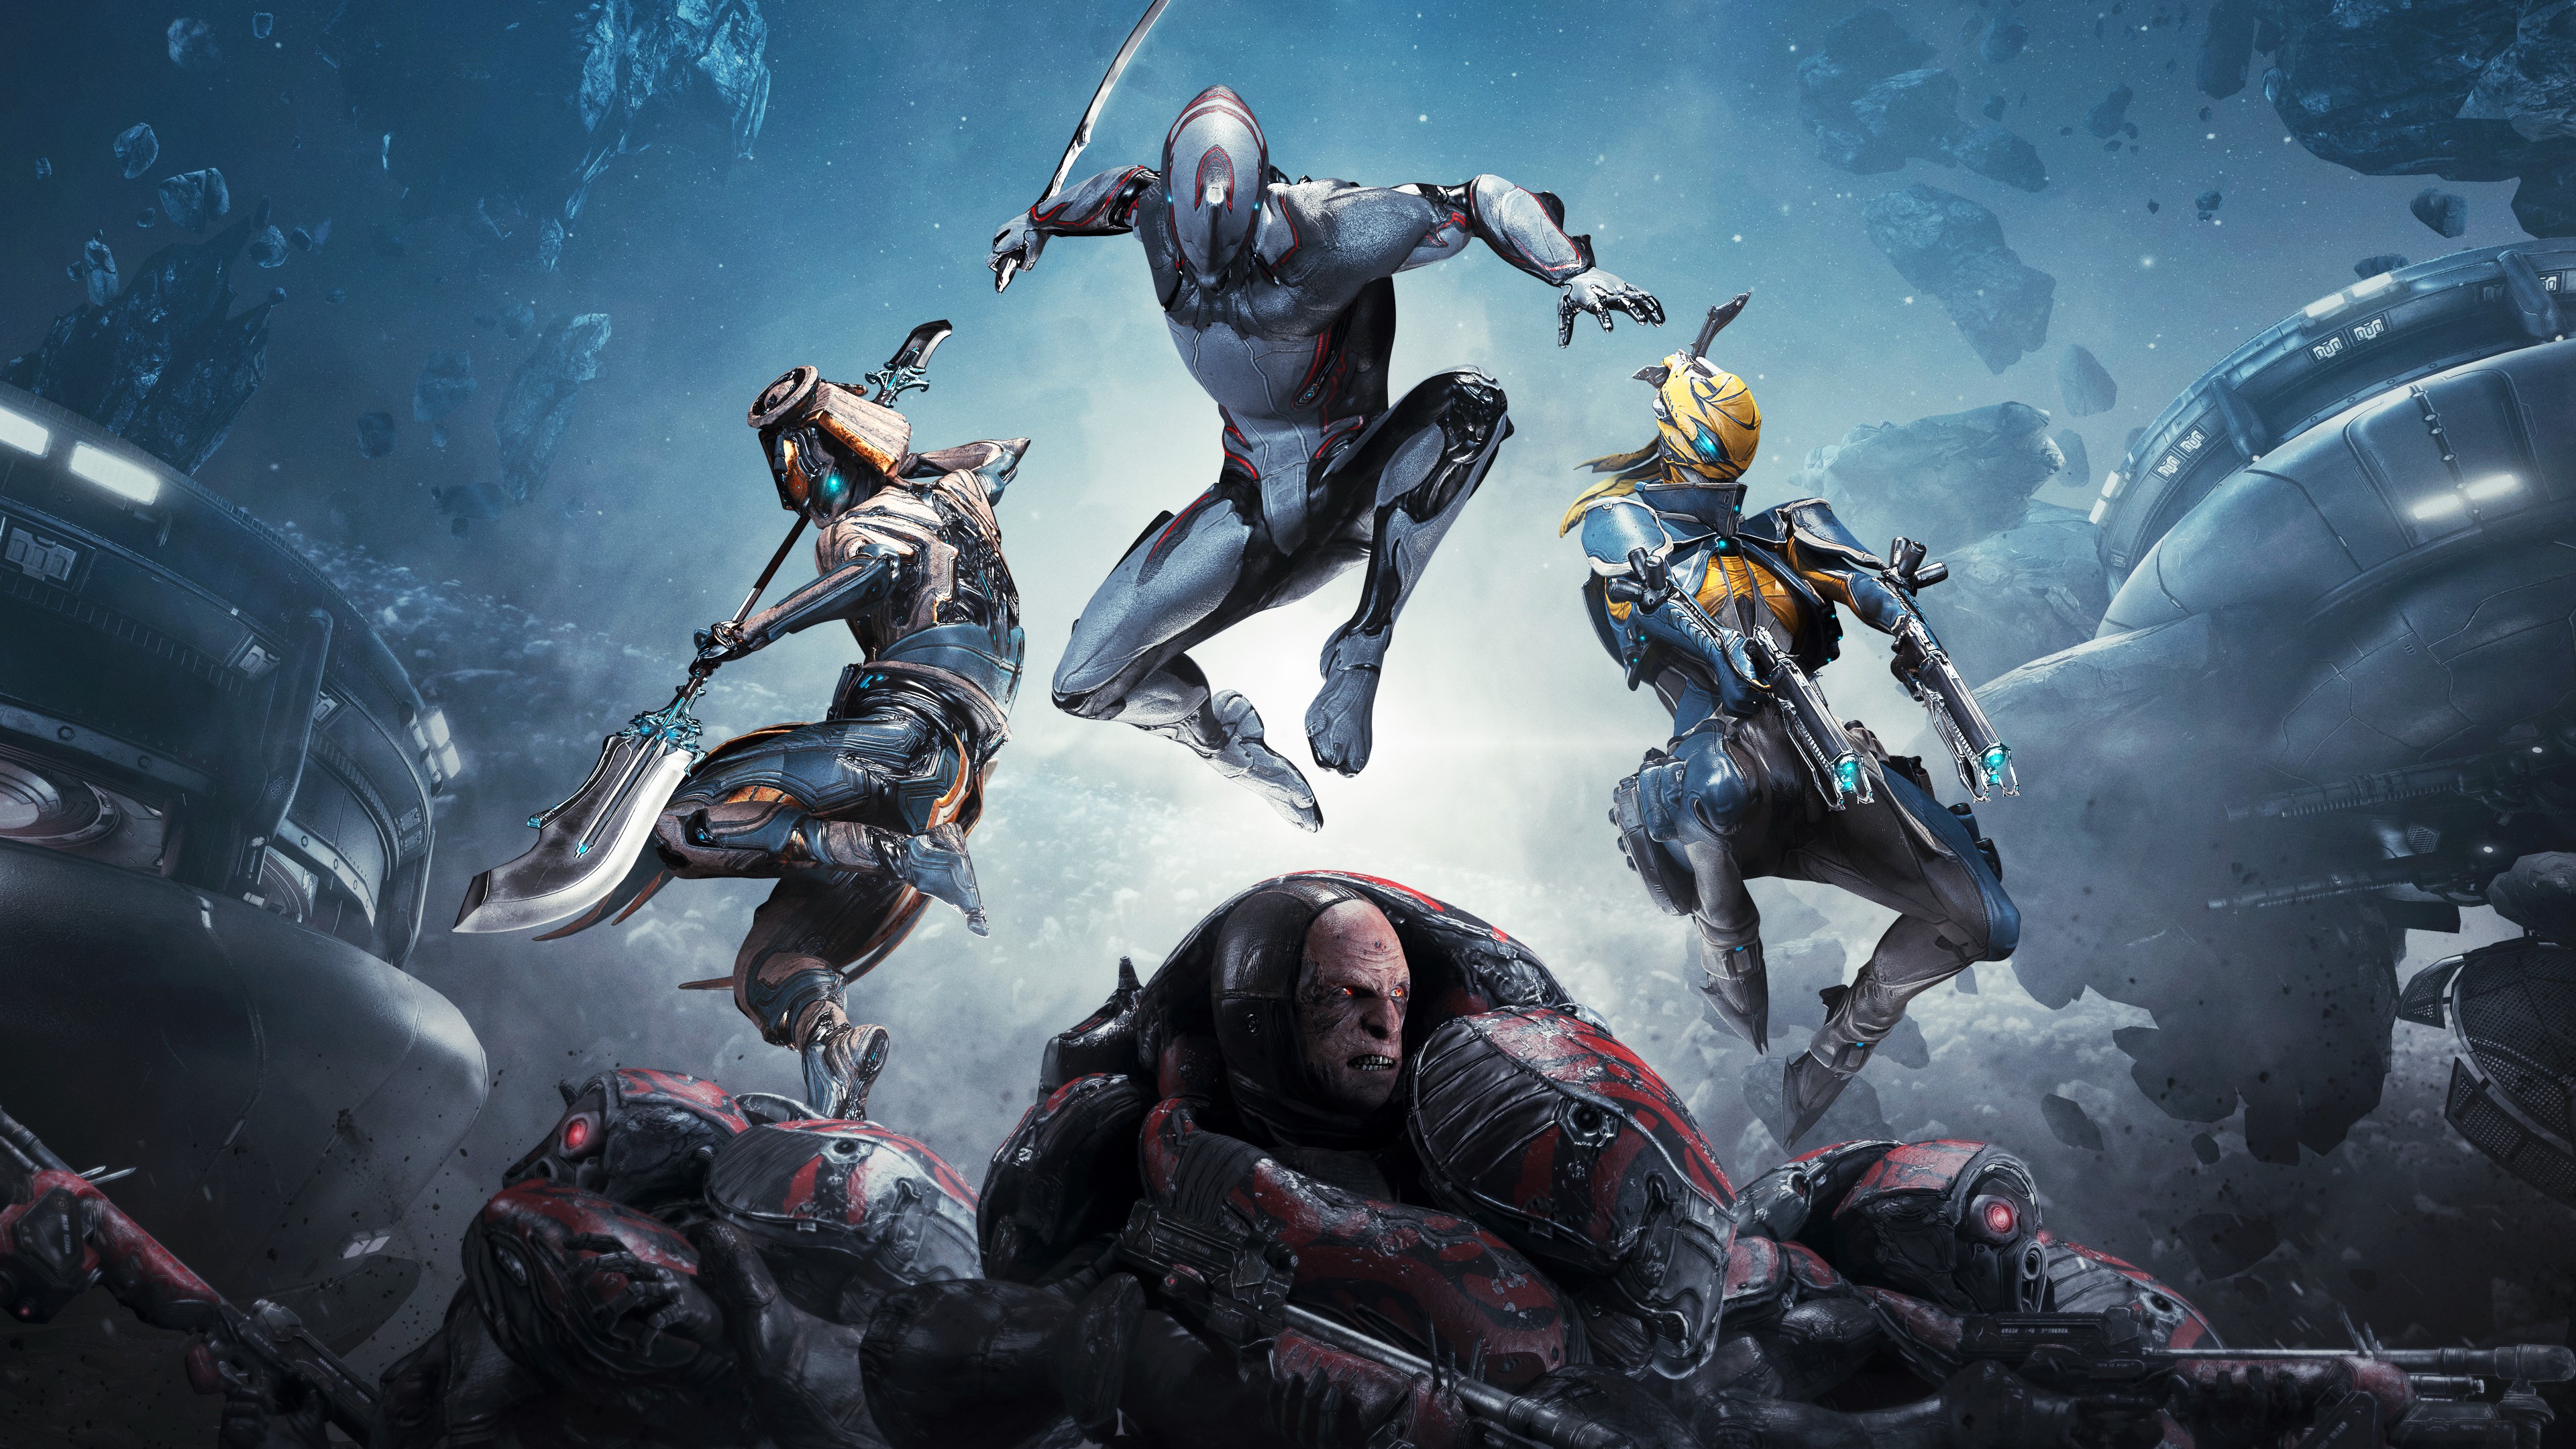 Soulframe is a New Free-to-Play Action MMORPG by Warframe Studio Digital  Extremes